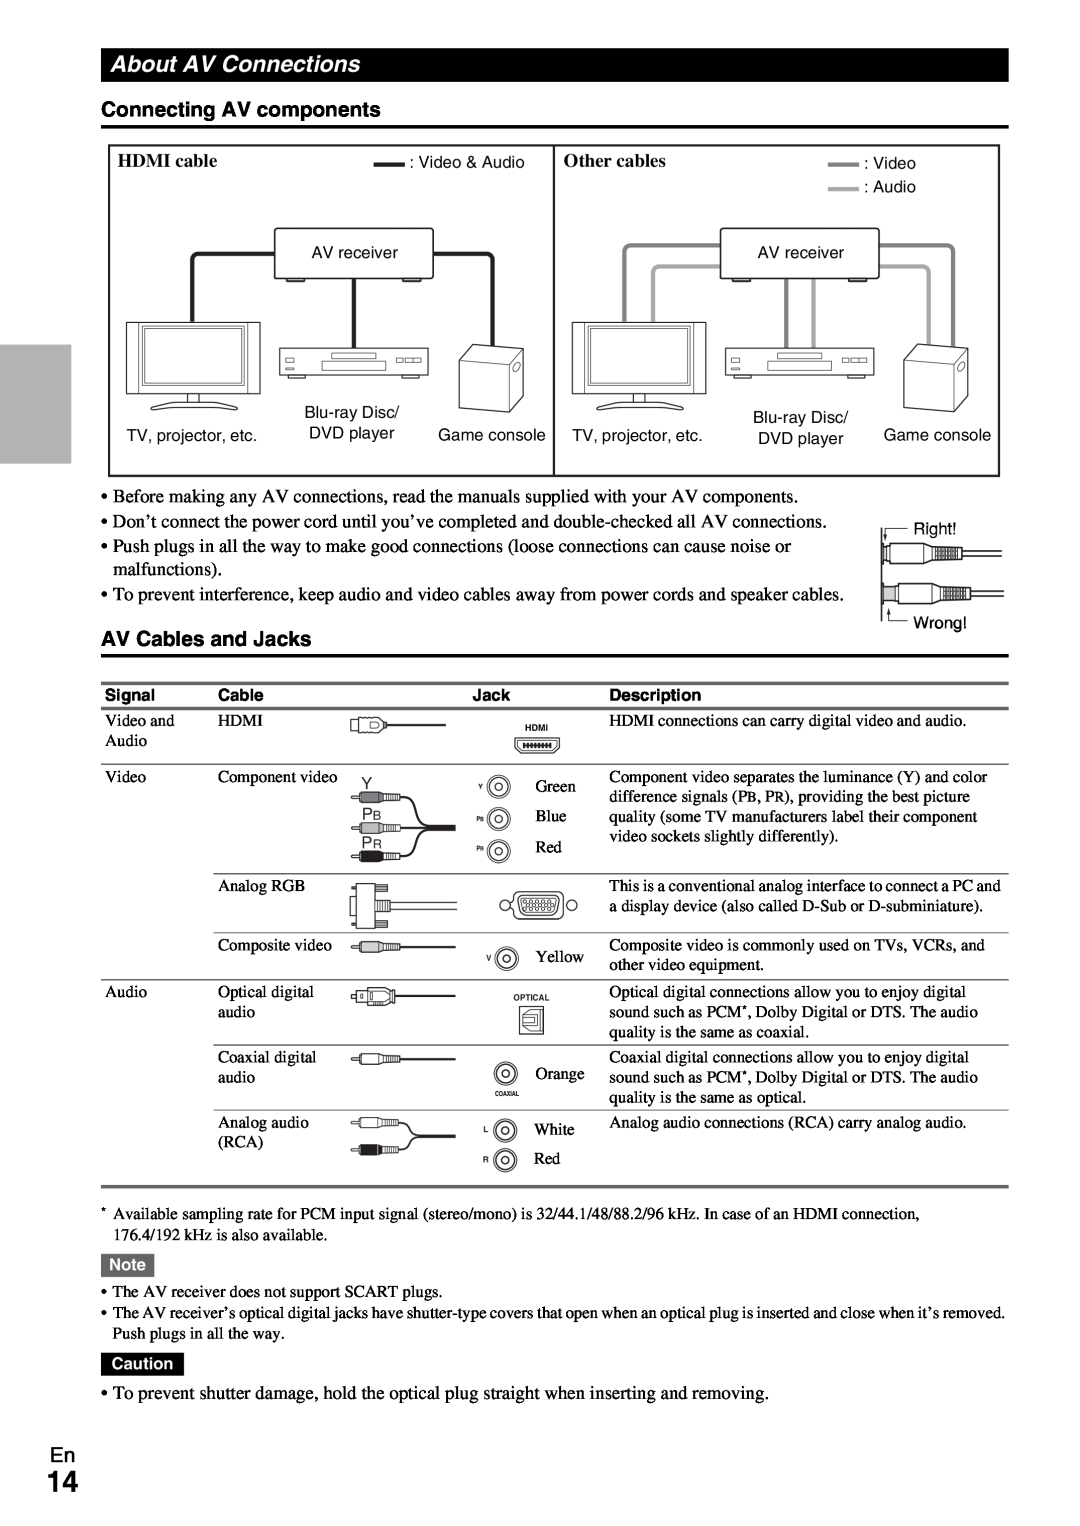 Onkyo HT-R690 instruction manual About AV Connections, Connecting AV components, AV Cables and Jacks 